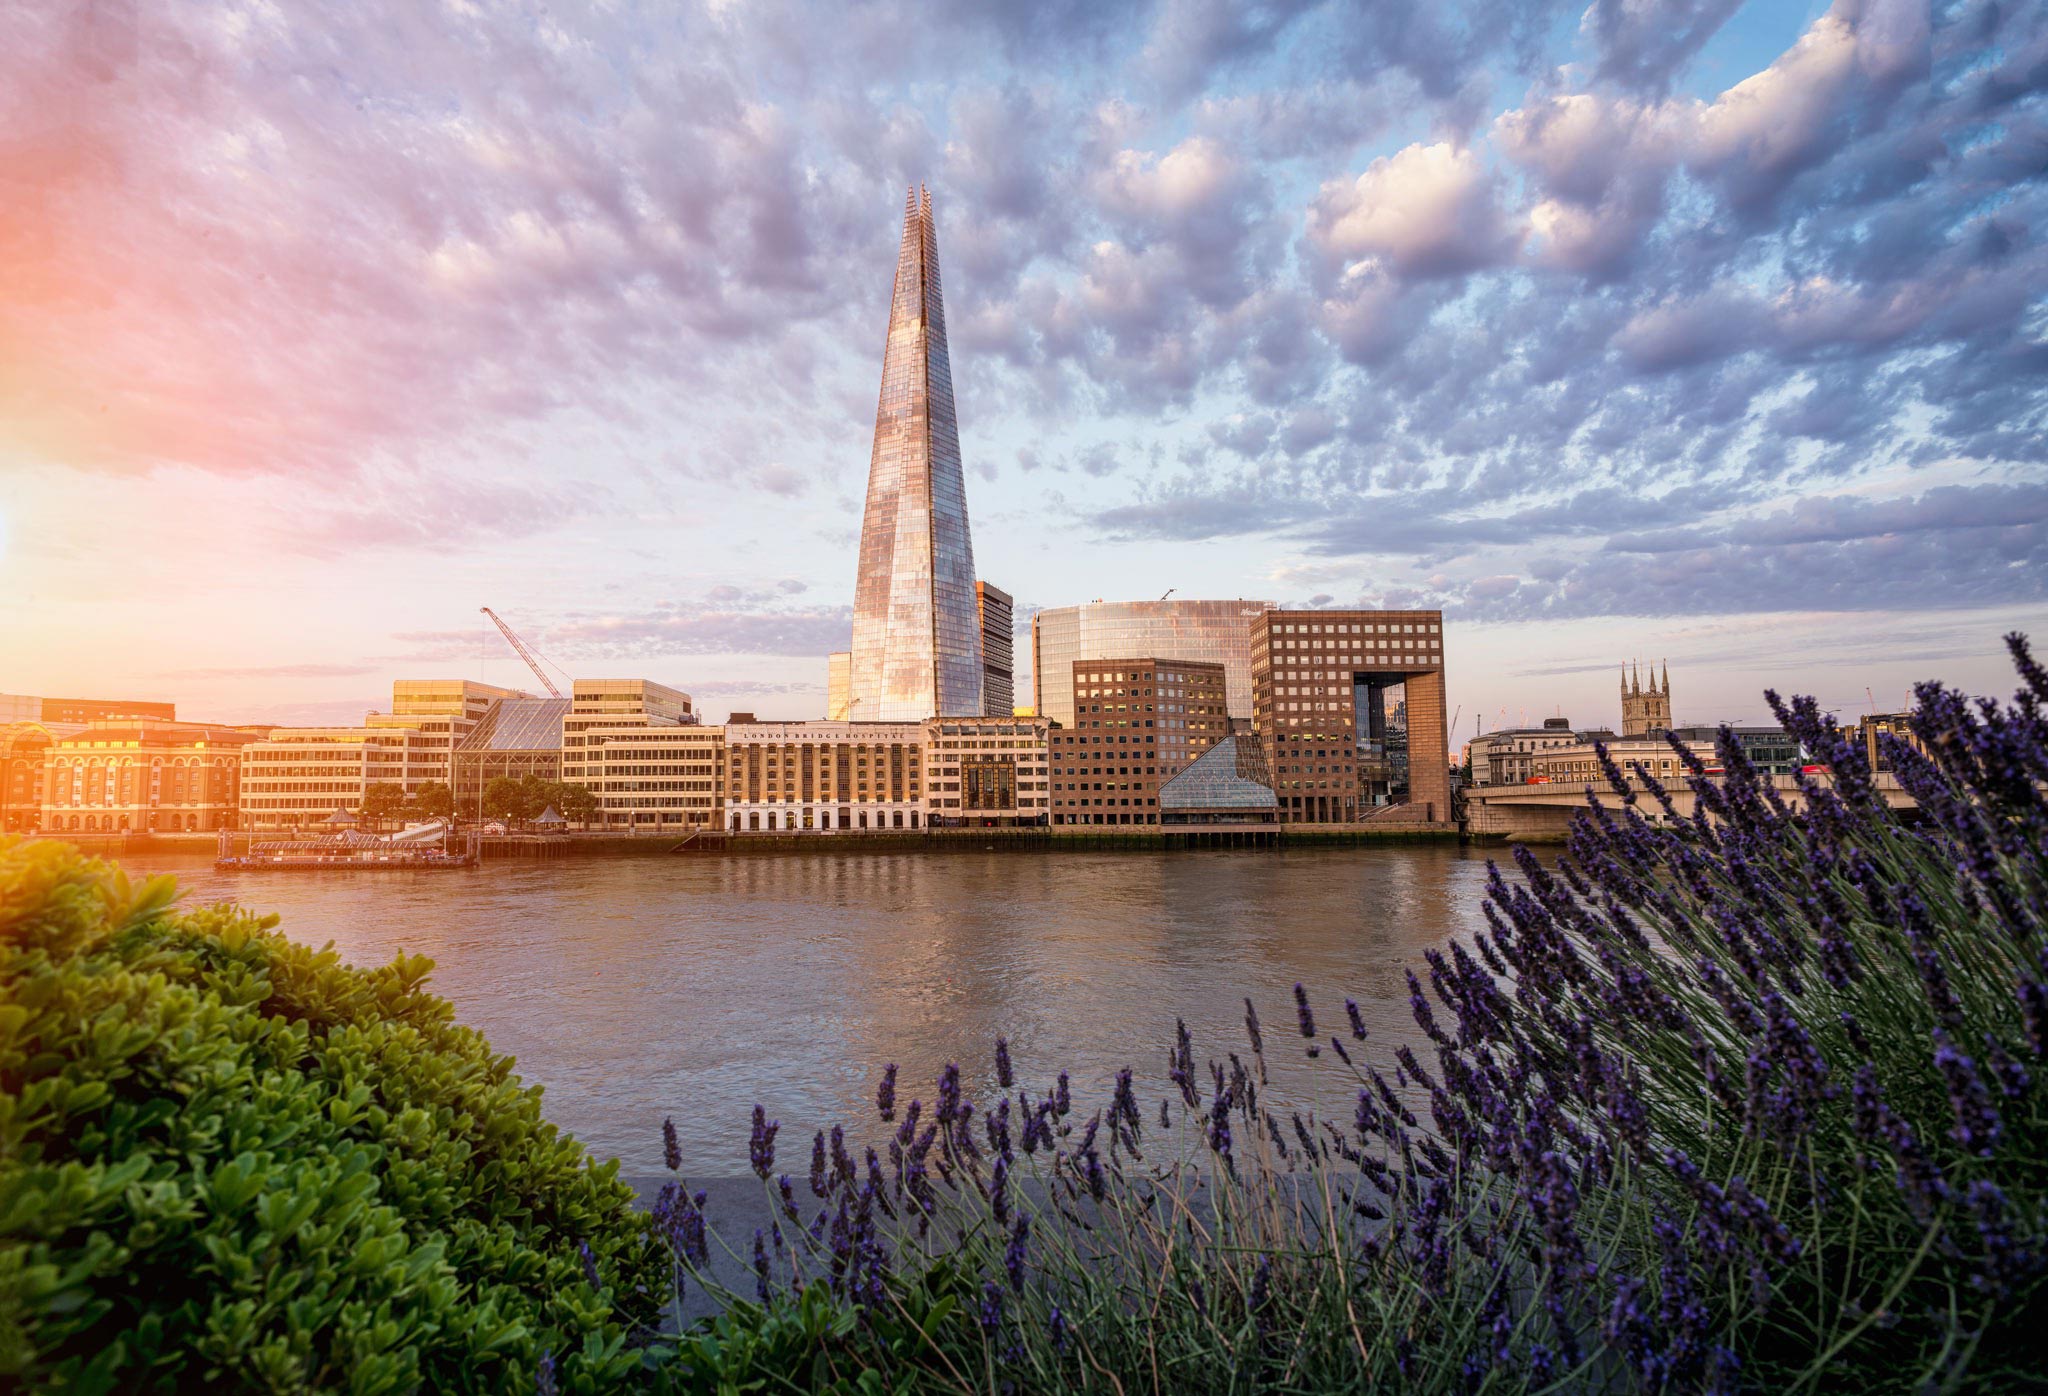 Captivating early morning shot of the Shard, a London landmark, captured by Wright Content. Lavender flowers in the foreground complement the iconic Shard building across the River Thames. The sky features scattered clouds, illuminated by the sunrise, casting a warm glow on the Shard's glass exterior.